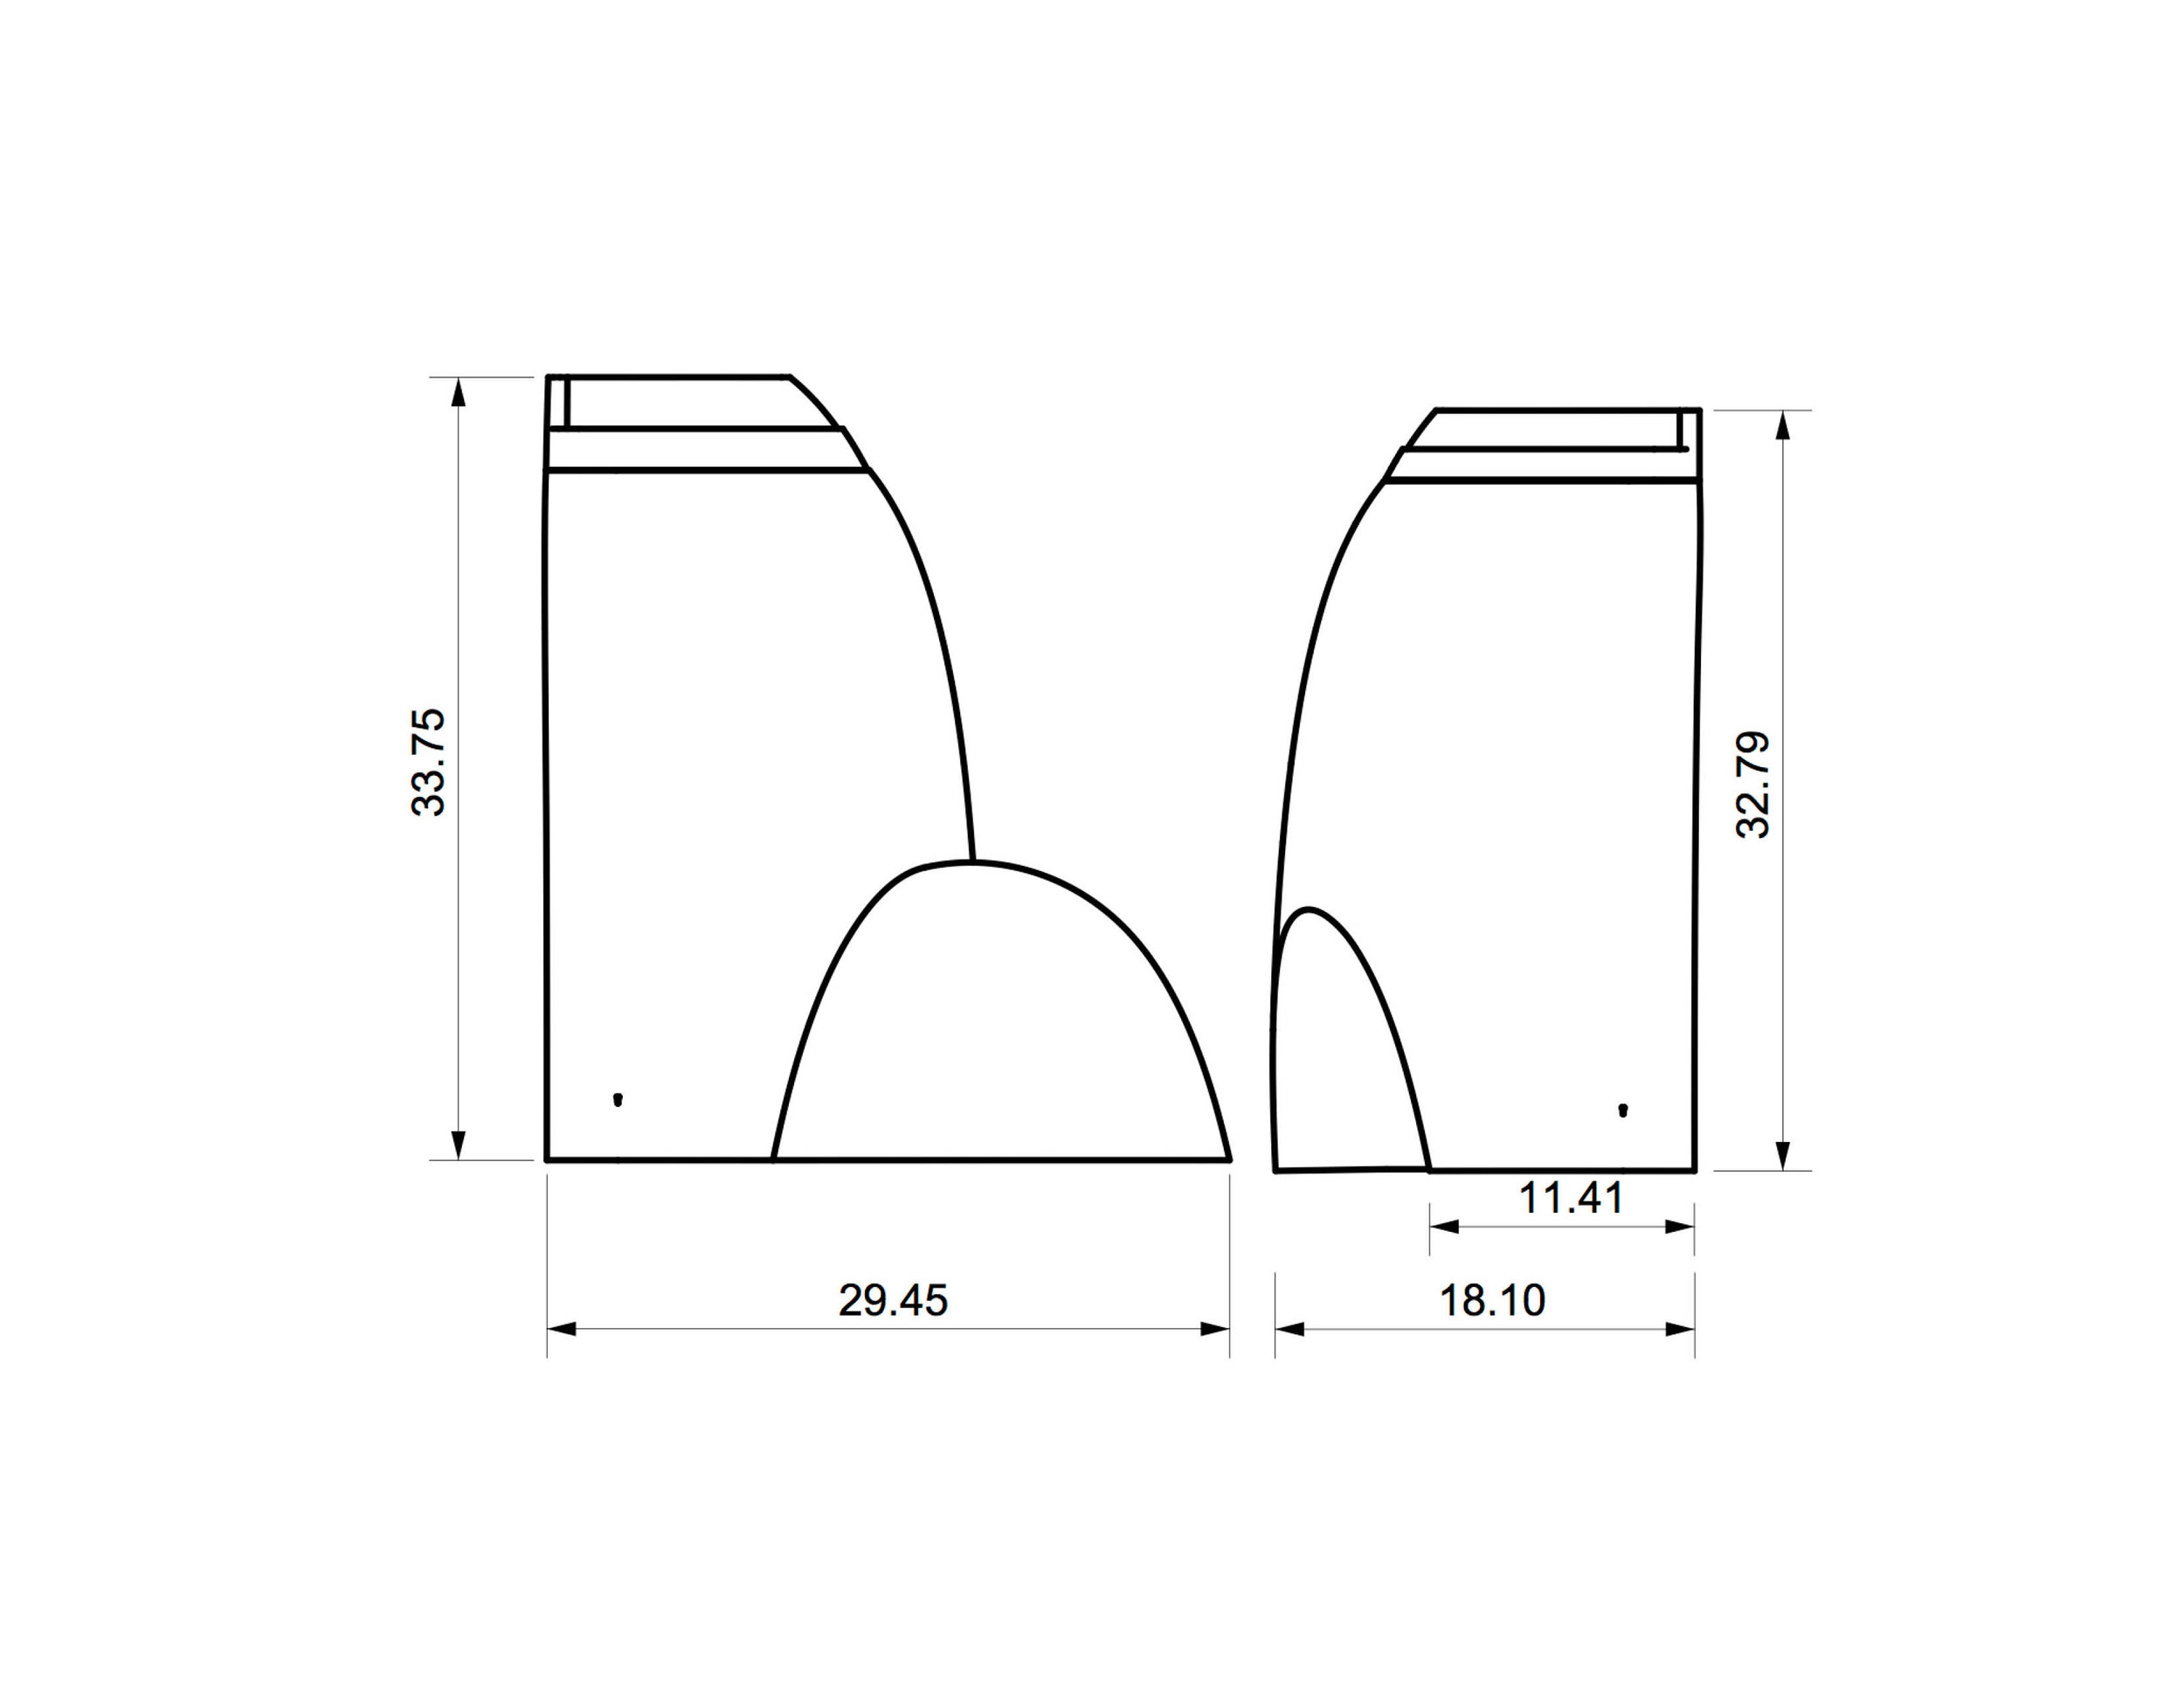 Stool Concept 3: Orthographic Projections, Page 2